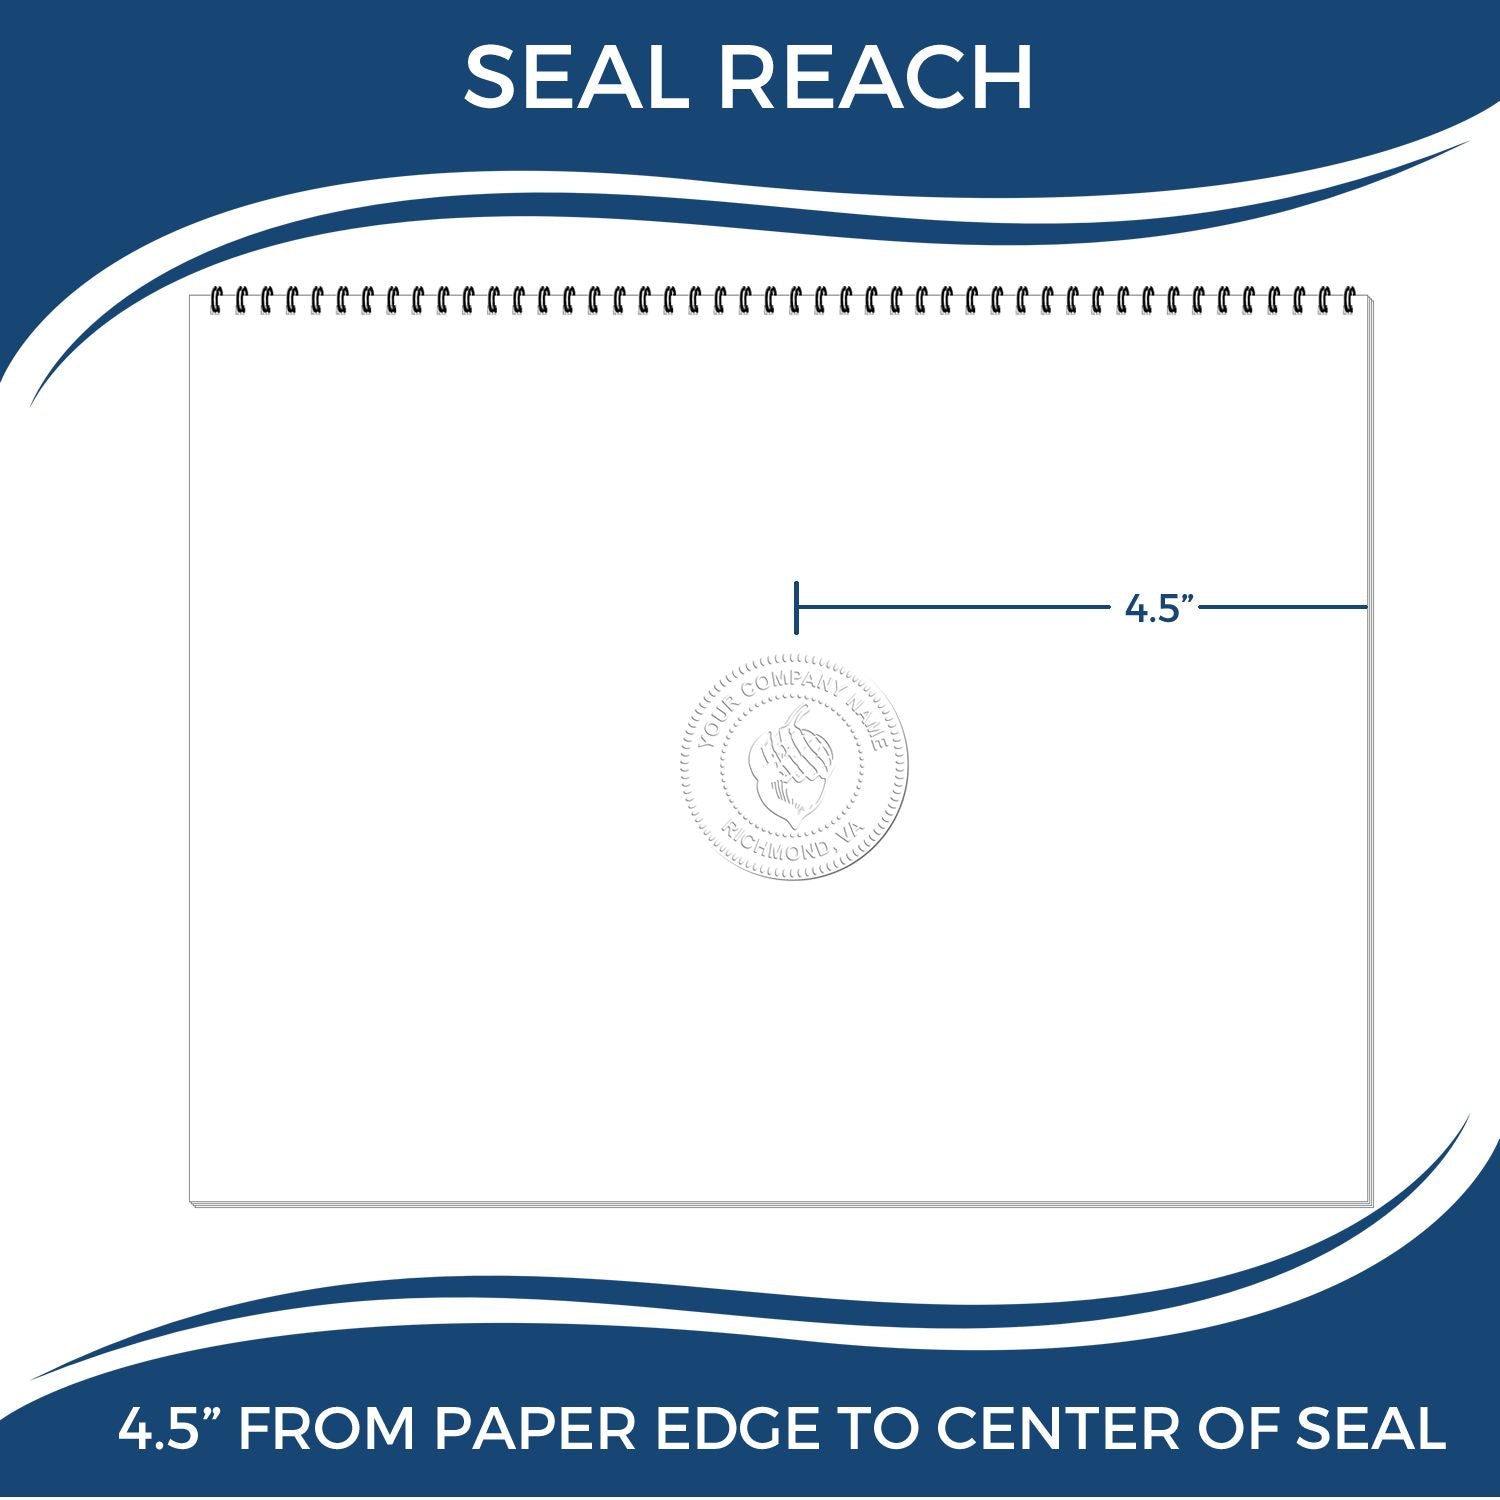 An infographic showing the seal reach which is represented by a ruler and a miniature seal image of the State of Washington Extended Long Reach Engineer Seal